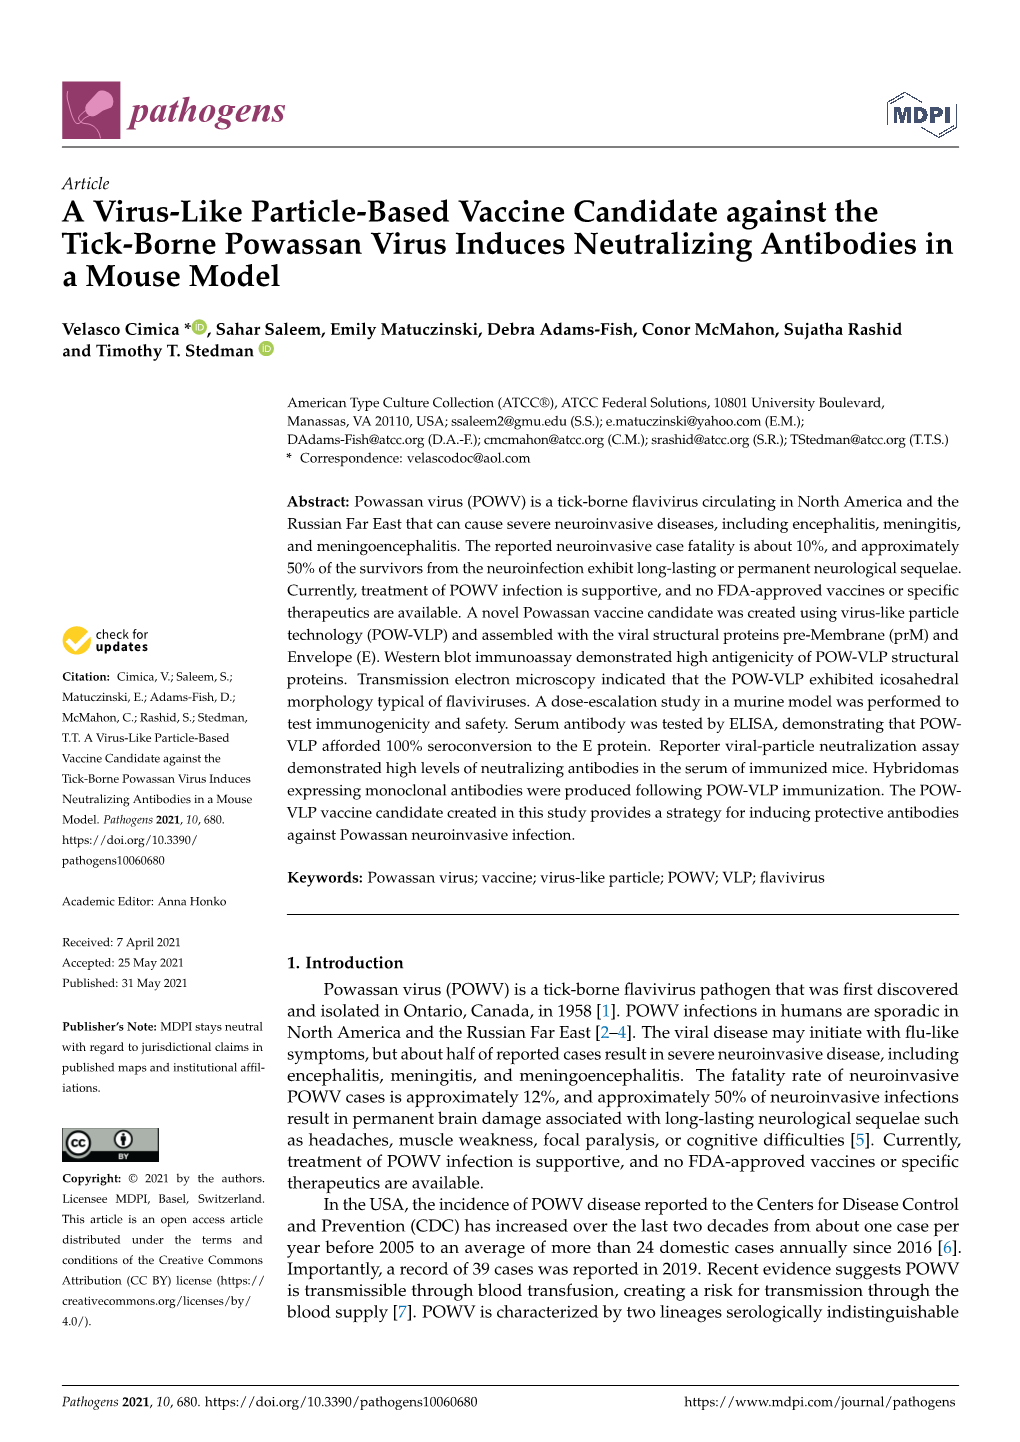 A Virus-Like Particle-Based Vaccine Candidate Against the Tick-Borne Powassan Virus Induces Neutralizing Antibodies in a Mouse Model